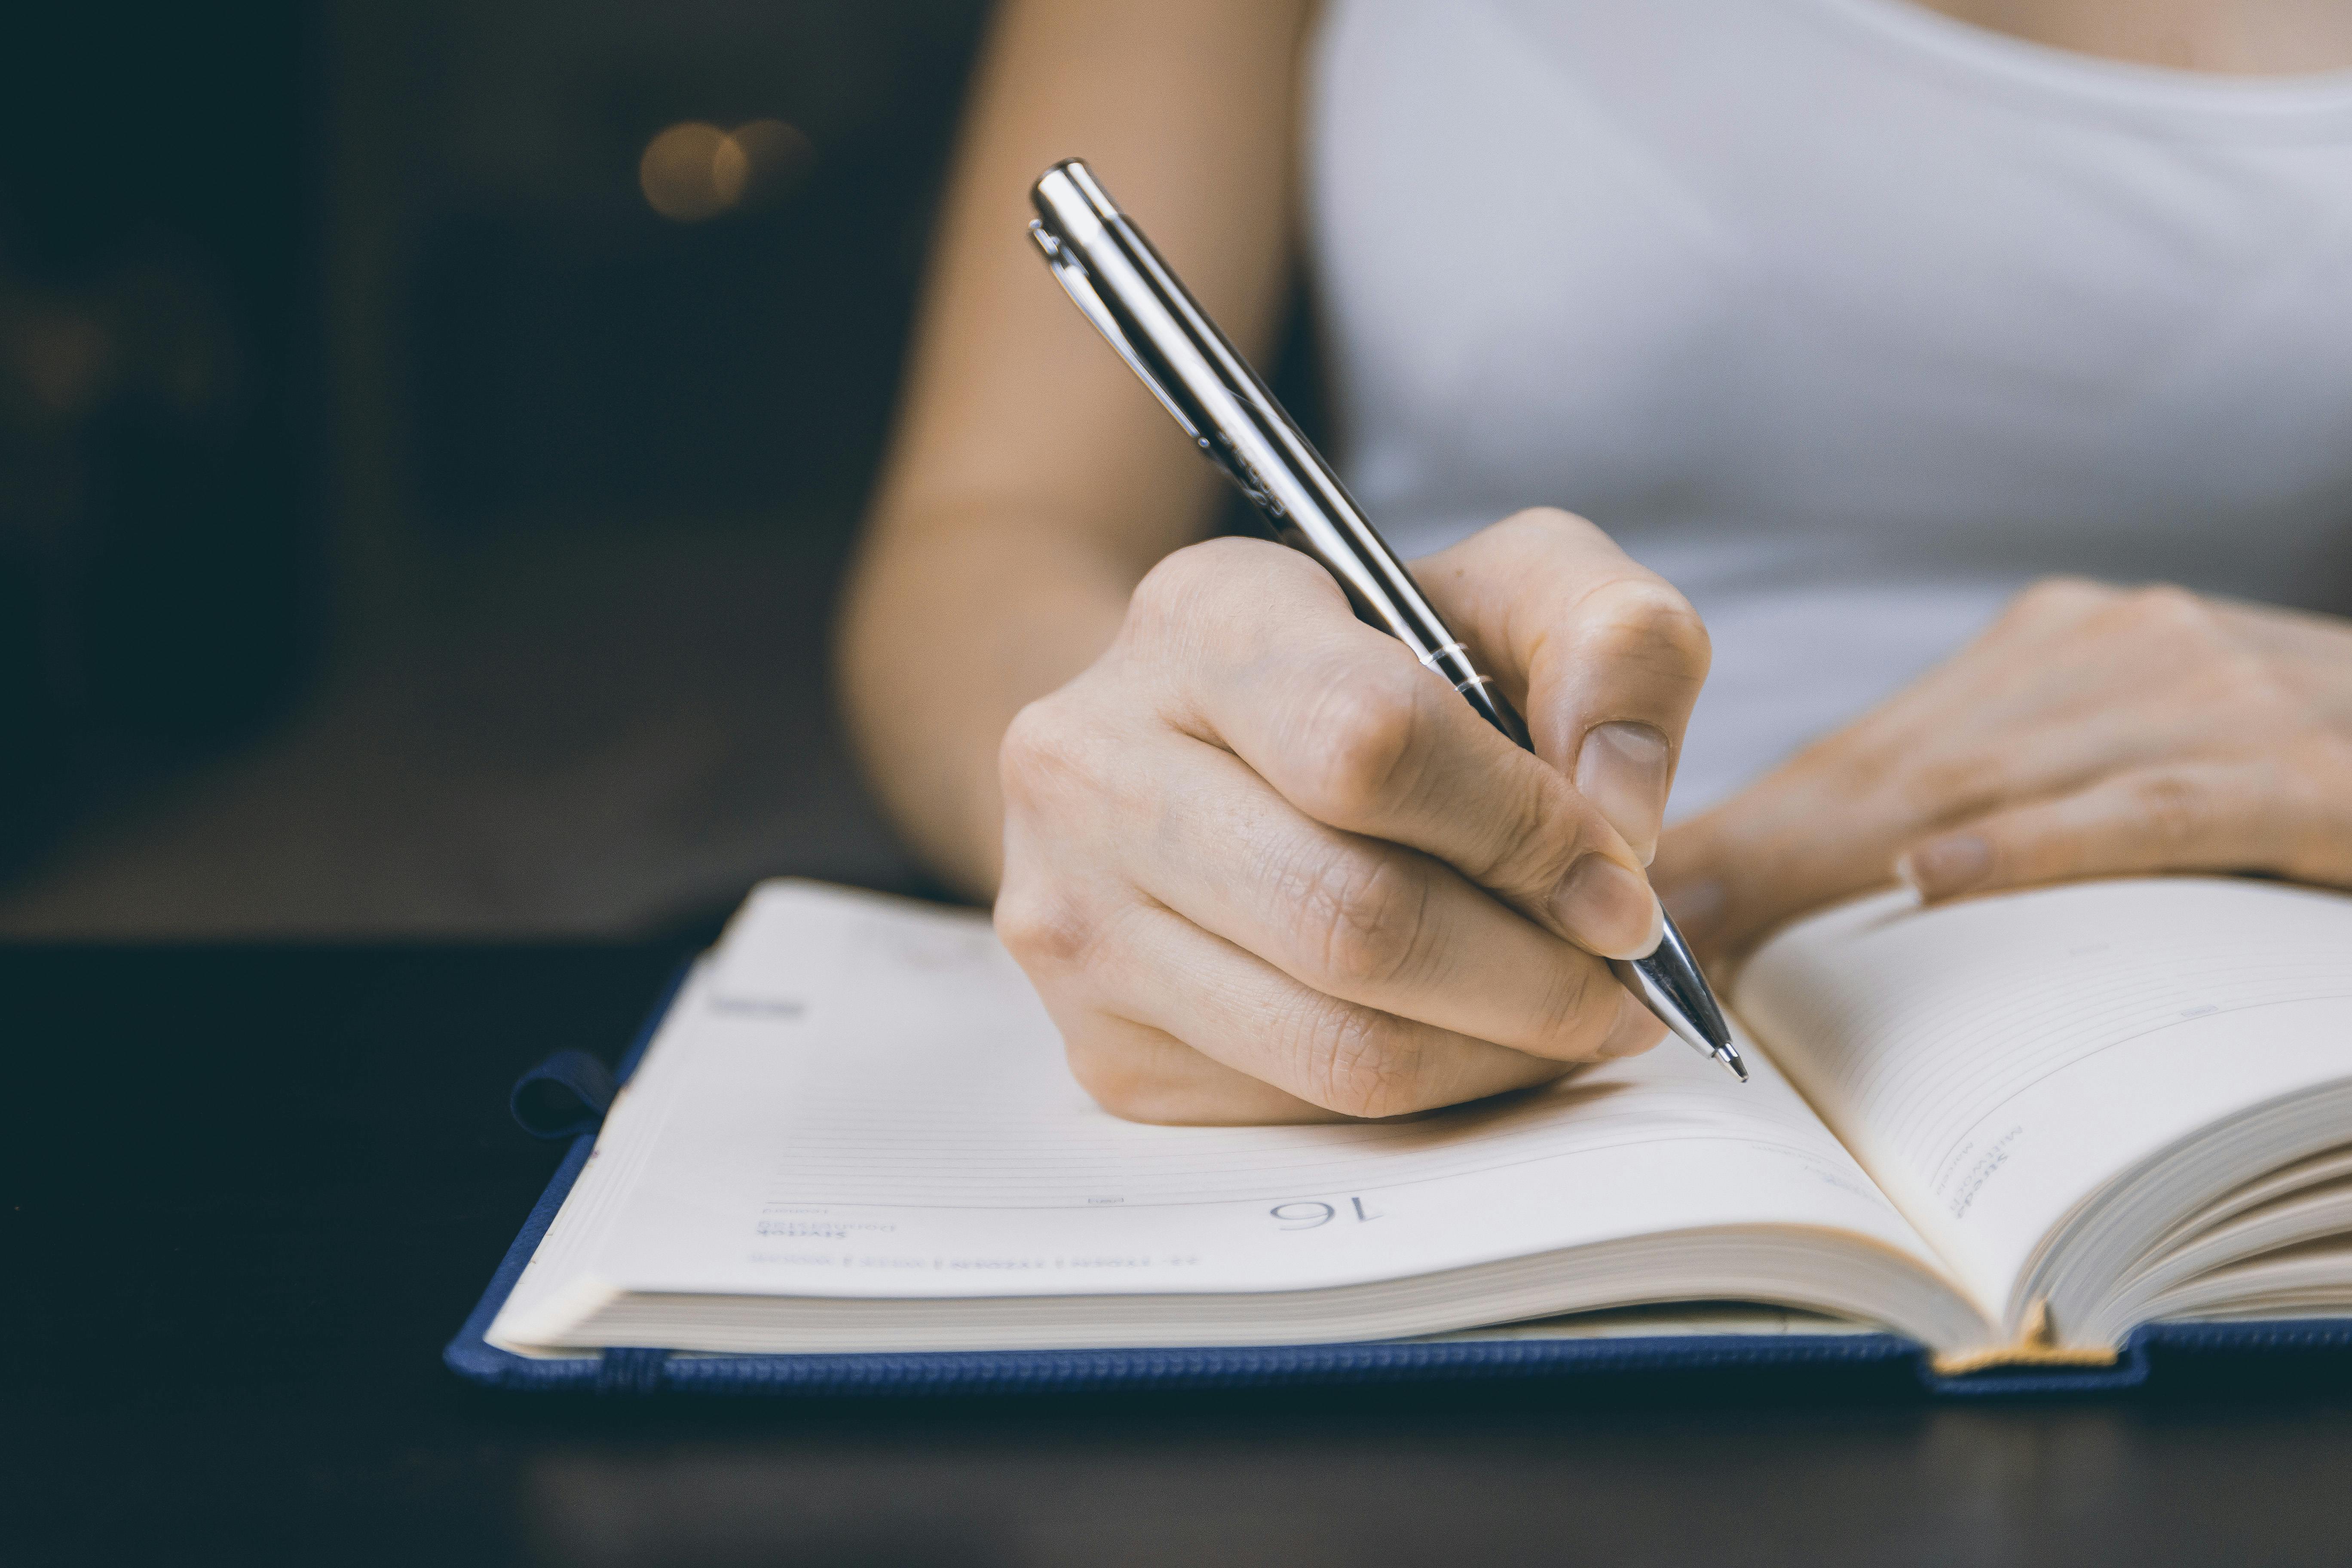 Woman writes a note | Source: Pexels